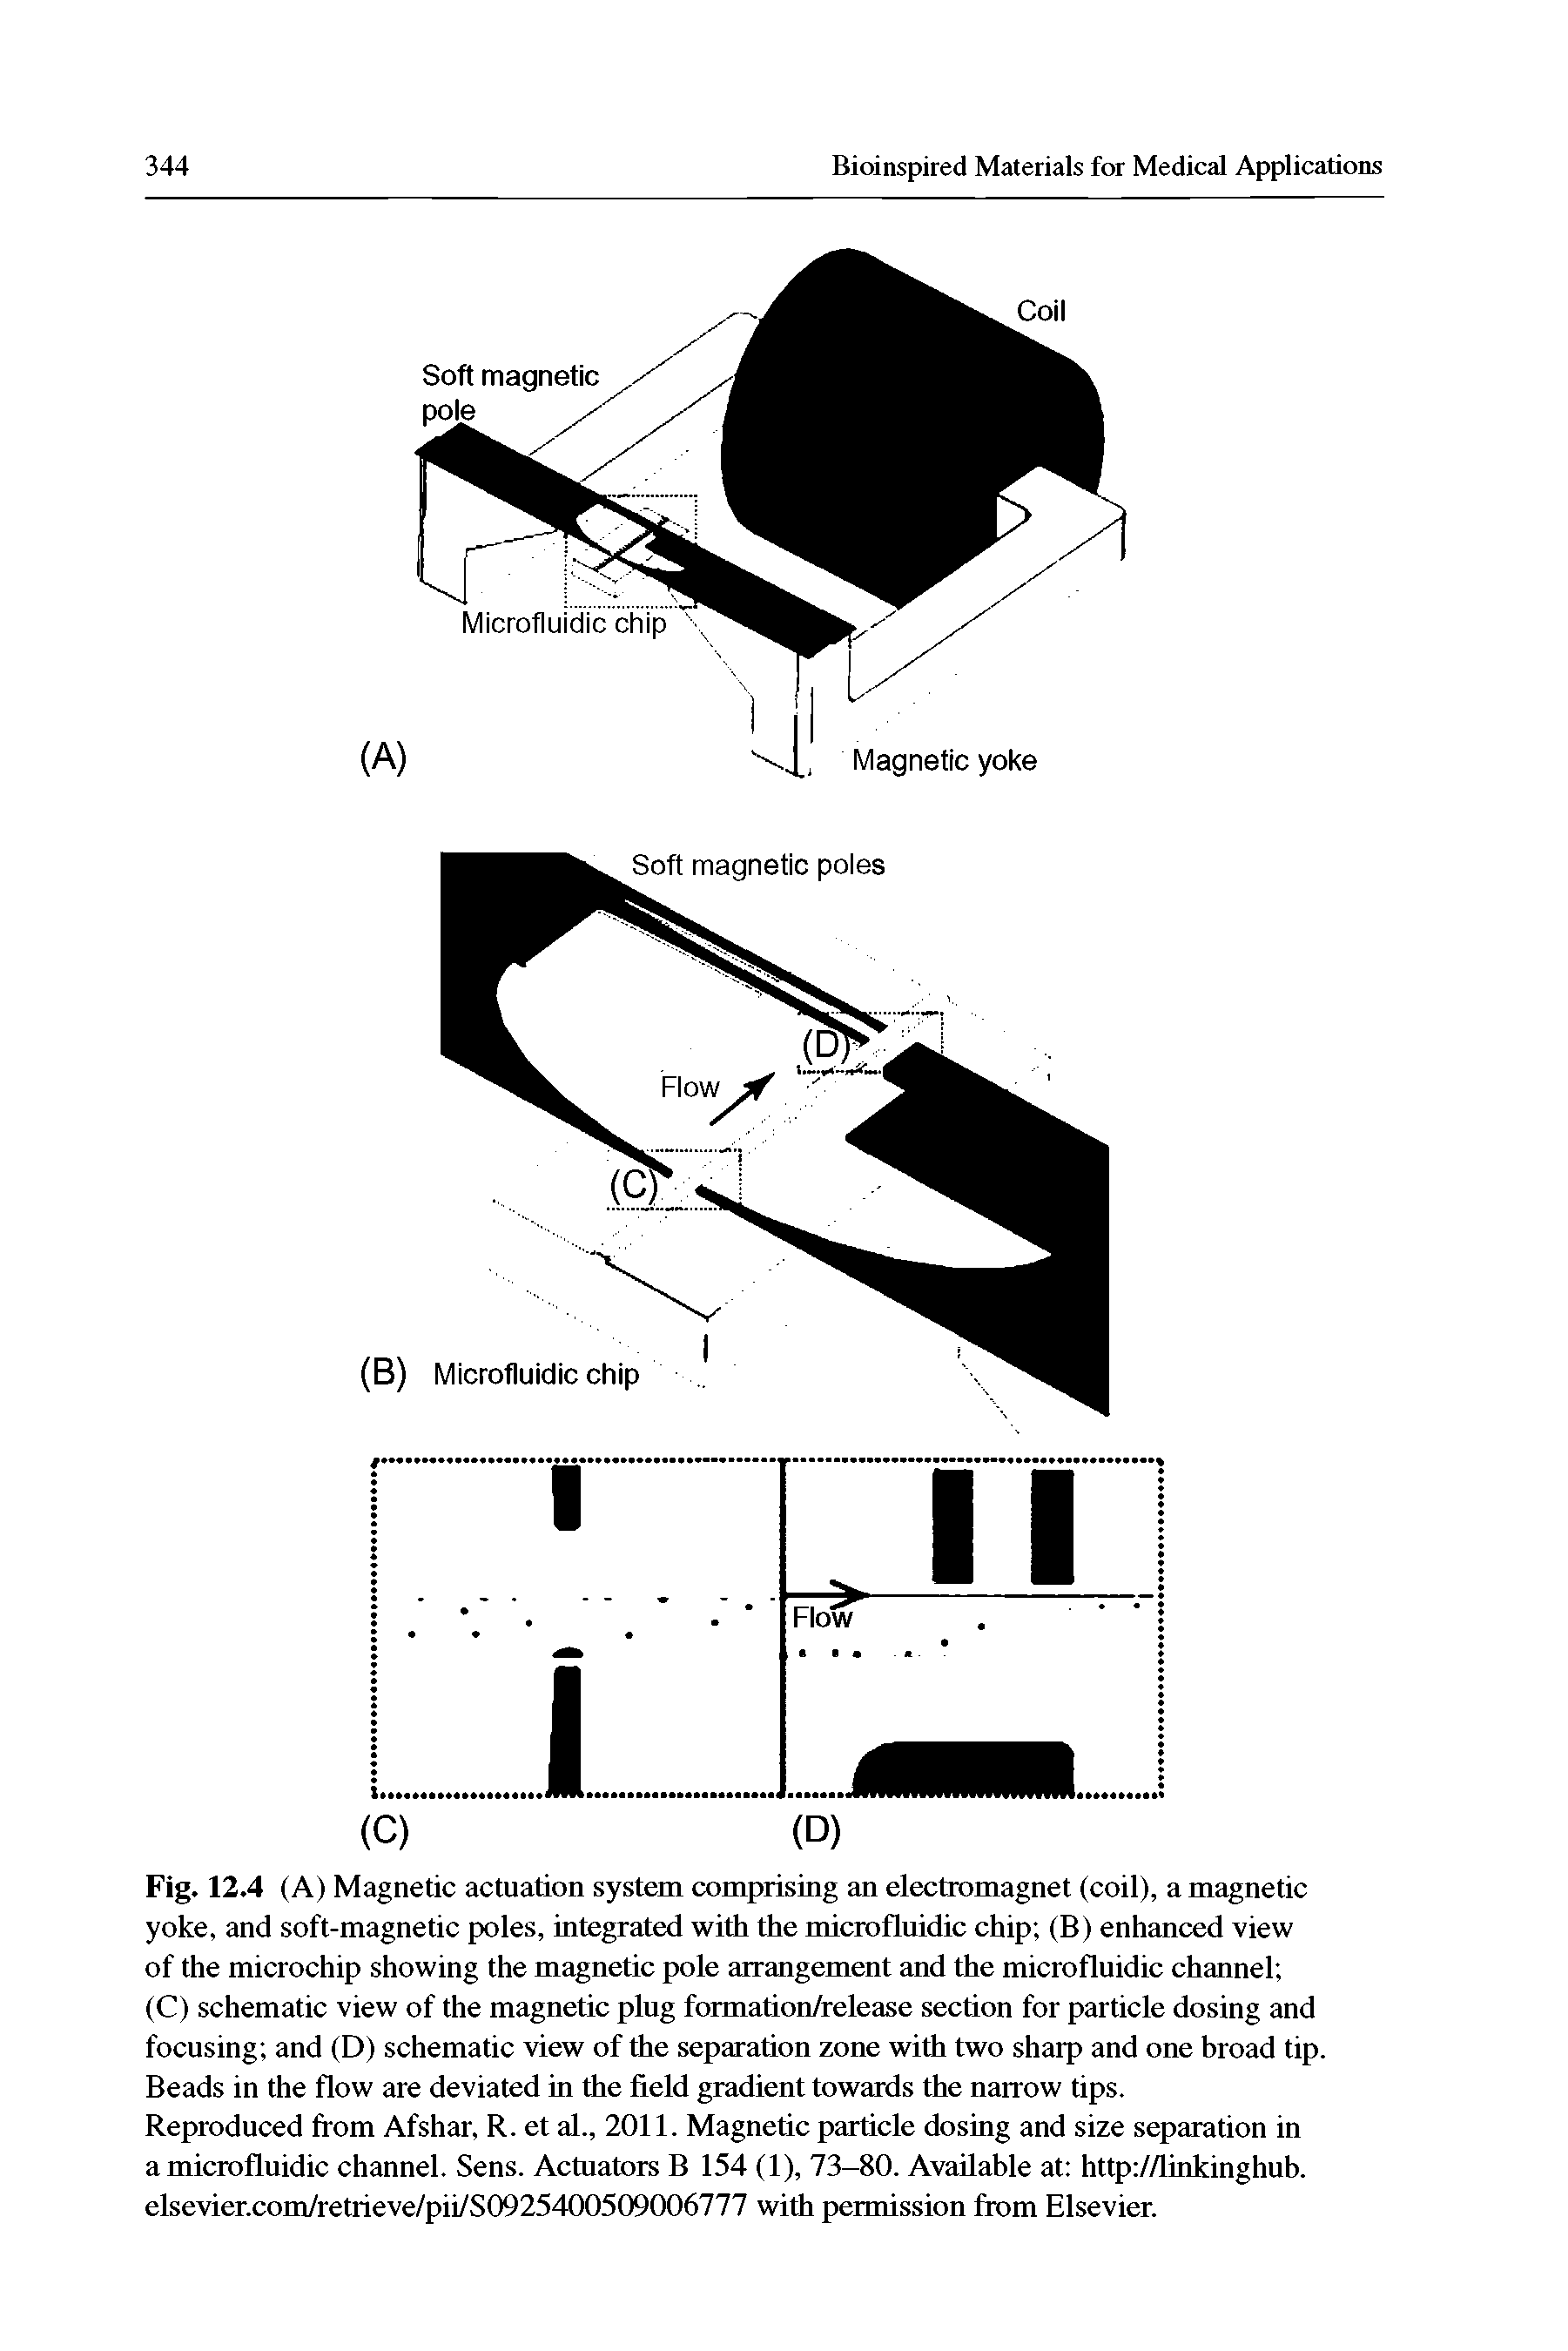 Fig. 12.4 (A) Magnetic actuation system comprising an electromagnet (coil), a magnetic yoke, and soft-magnetic poles, integrated with the microfluidic chip (B) enhanced view of the microchip showing the magnetic pole arrangement and the microfluidic channel ...